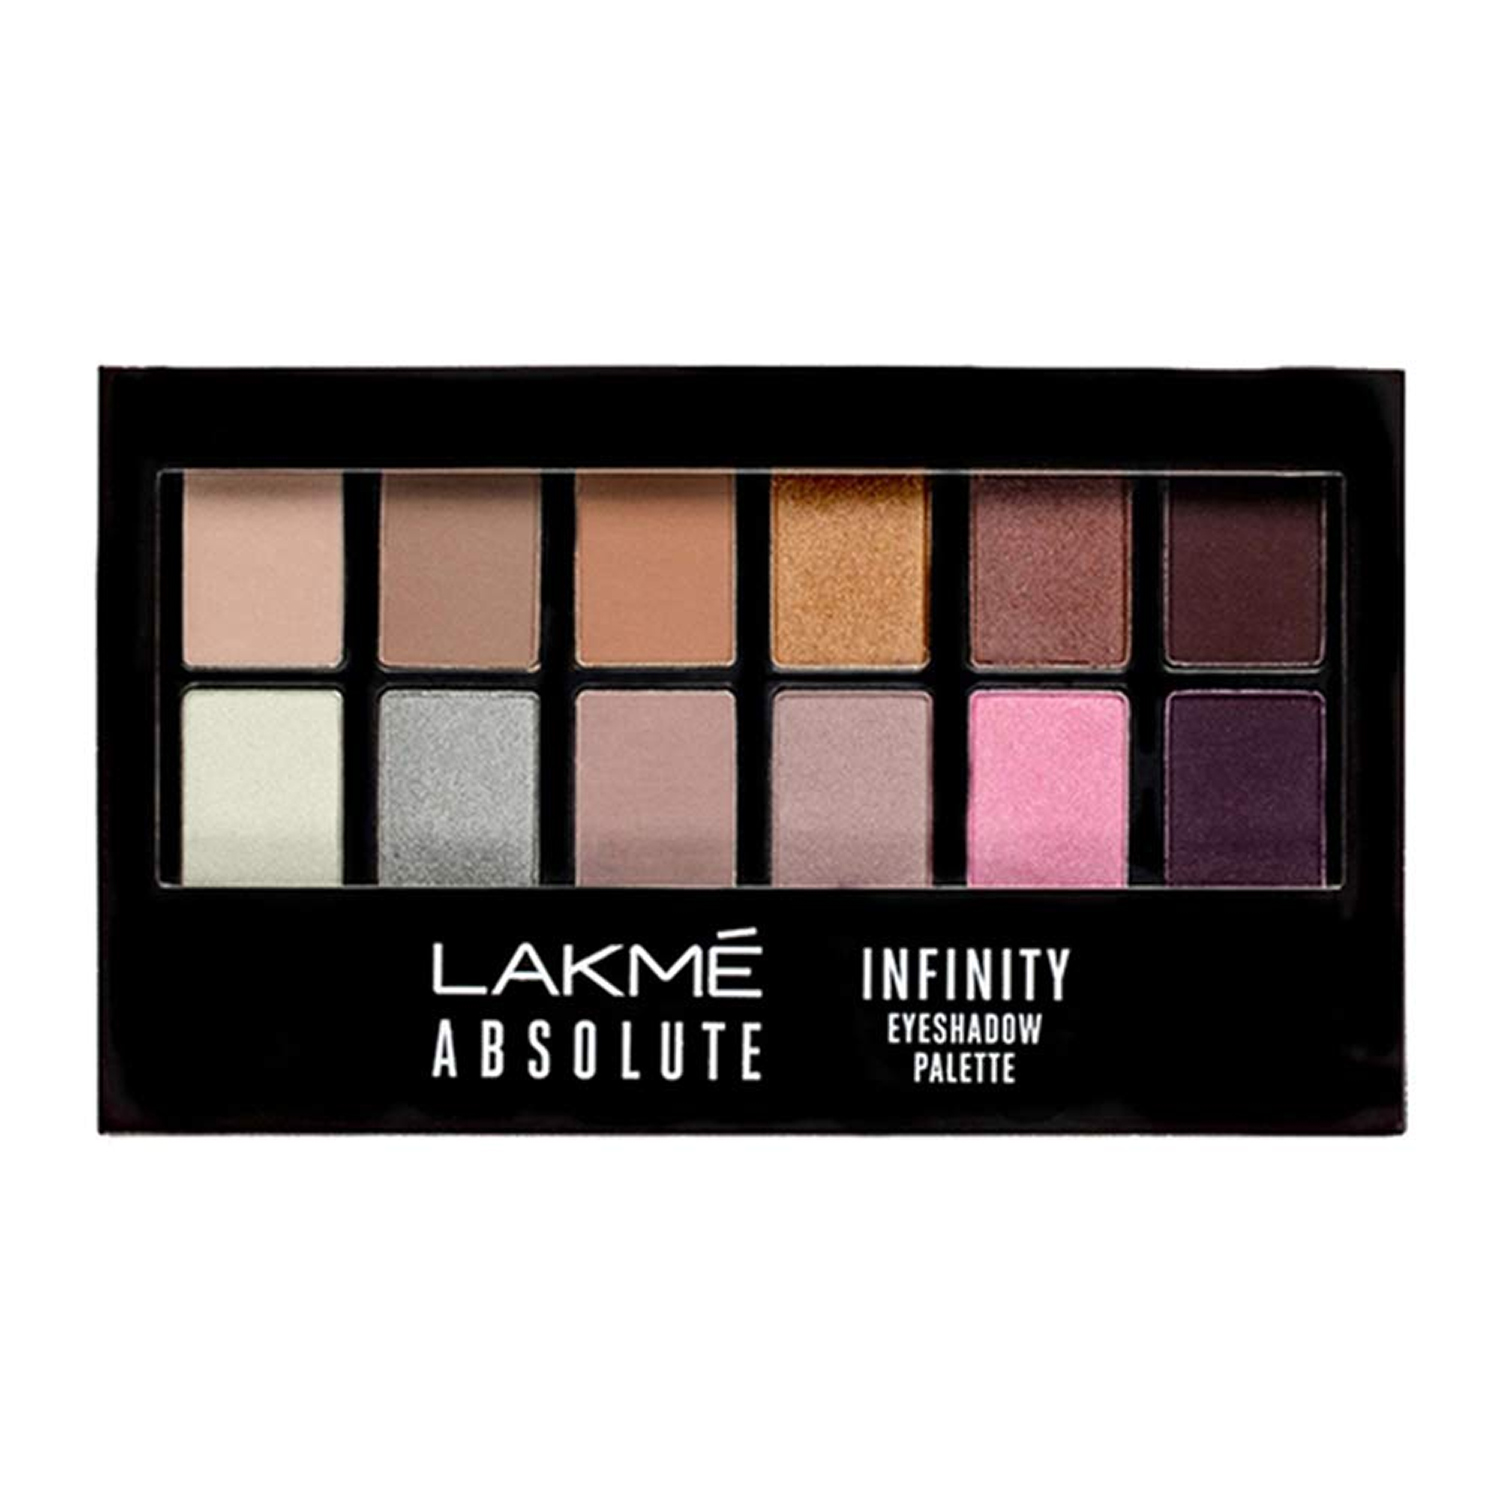 Lakme Absolute Infinity Eye Shadow Palette, 12gm-Soft Nudes